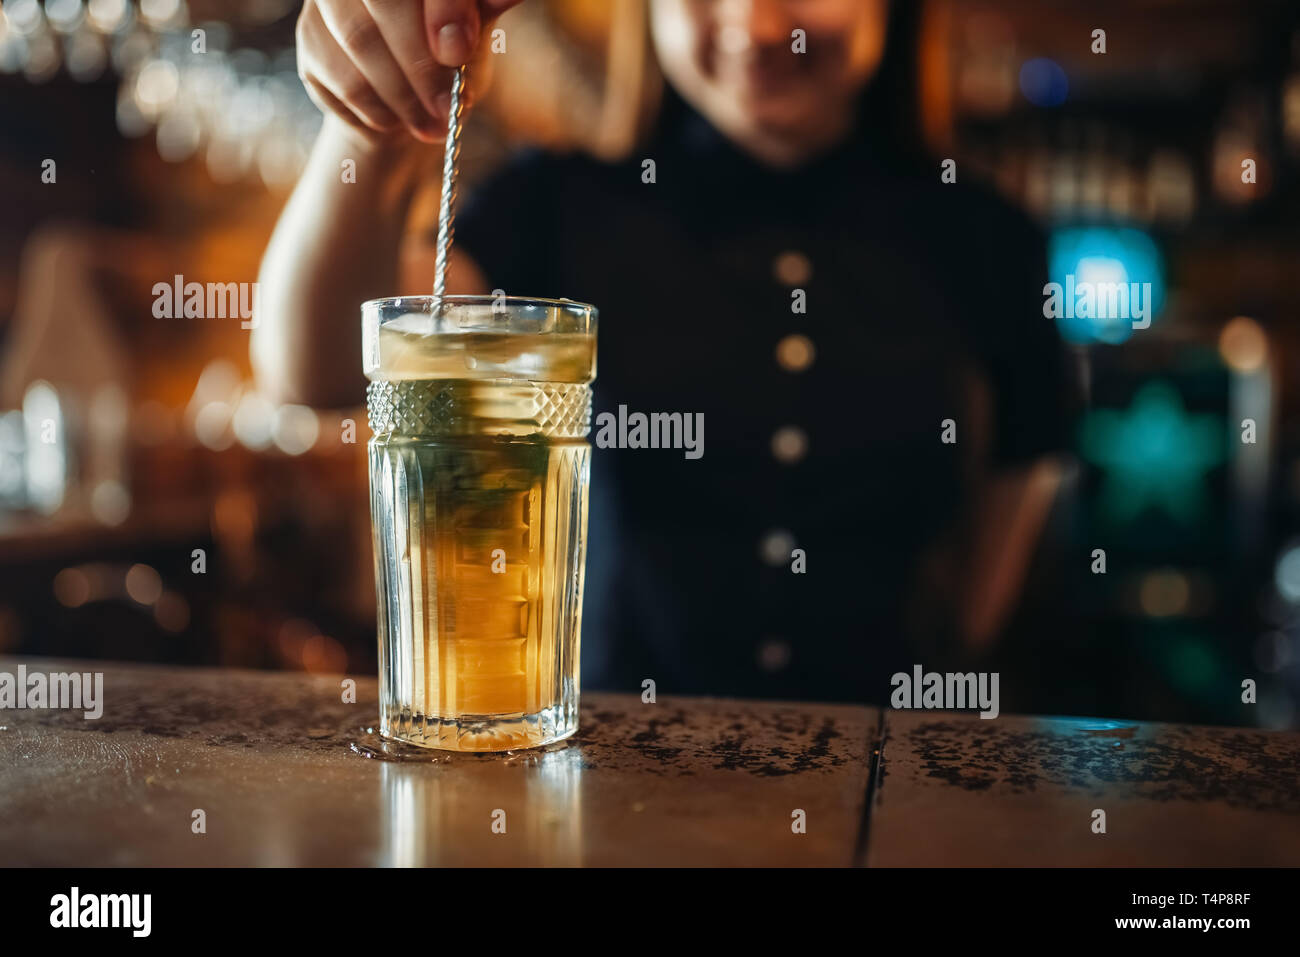 Female barman stir the drink in a glass. Woman bartender mixing at the bar counter in pub. Barkeeper occupation Stock Photo